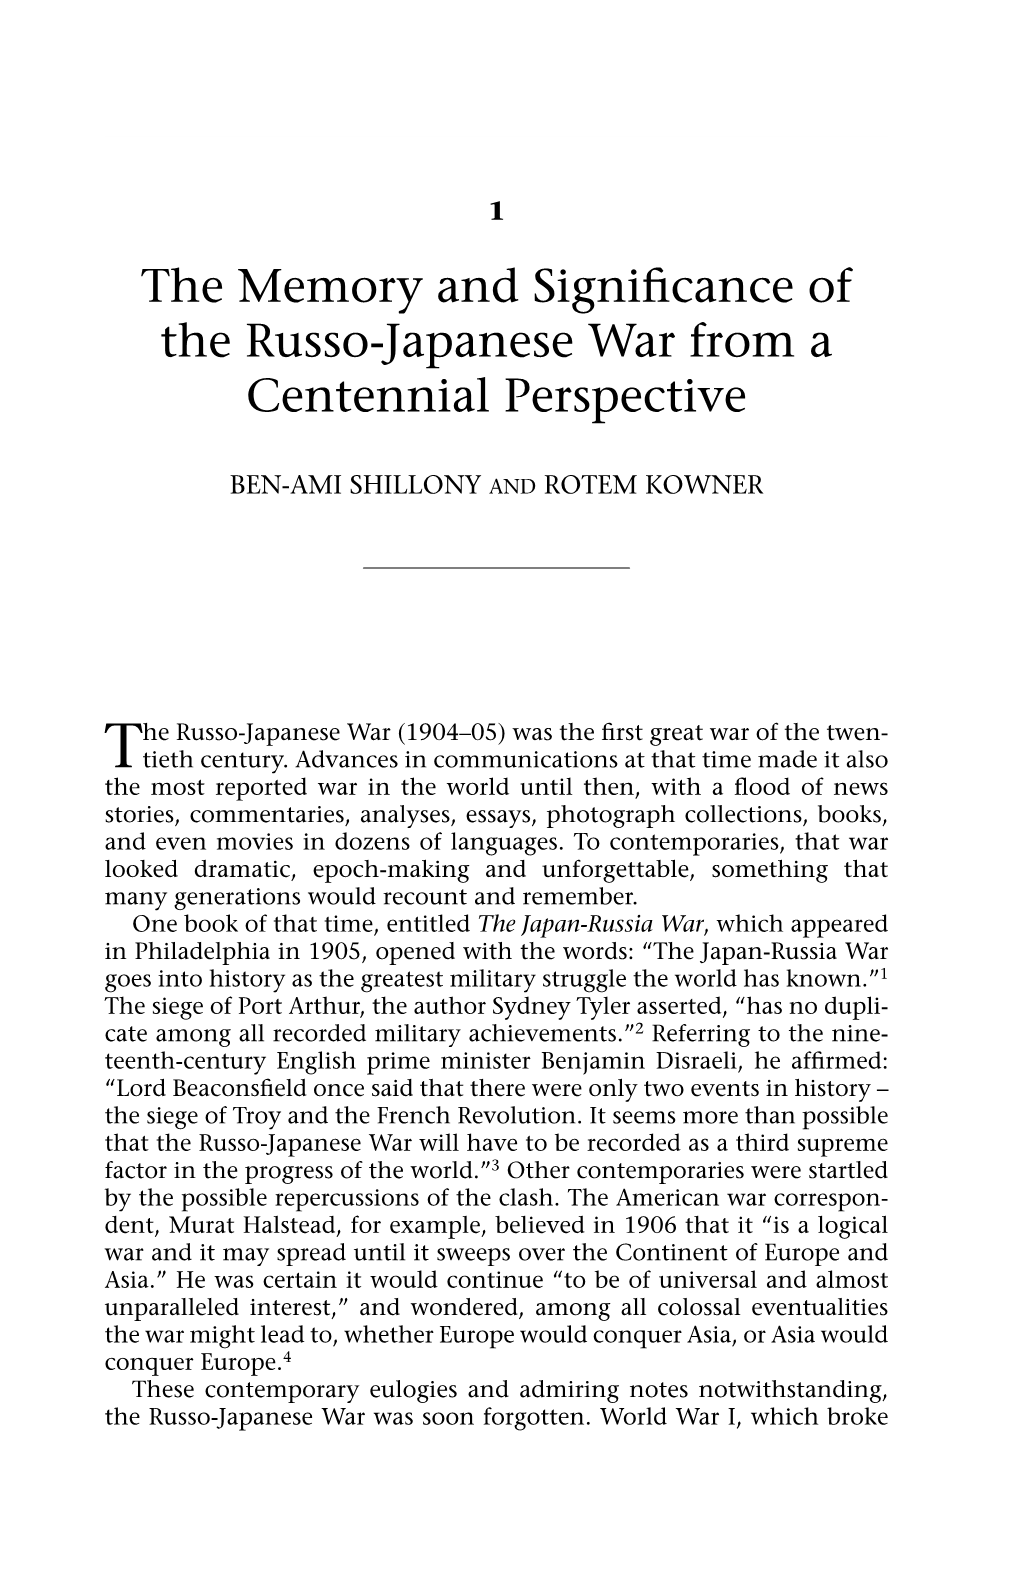 The Memory and Significance of the Russo-Japanese War from A